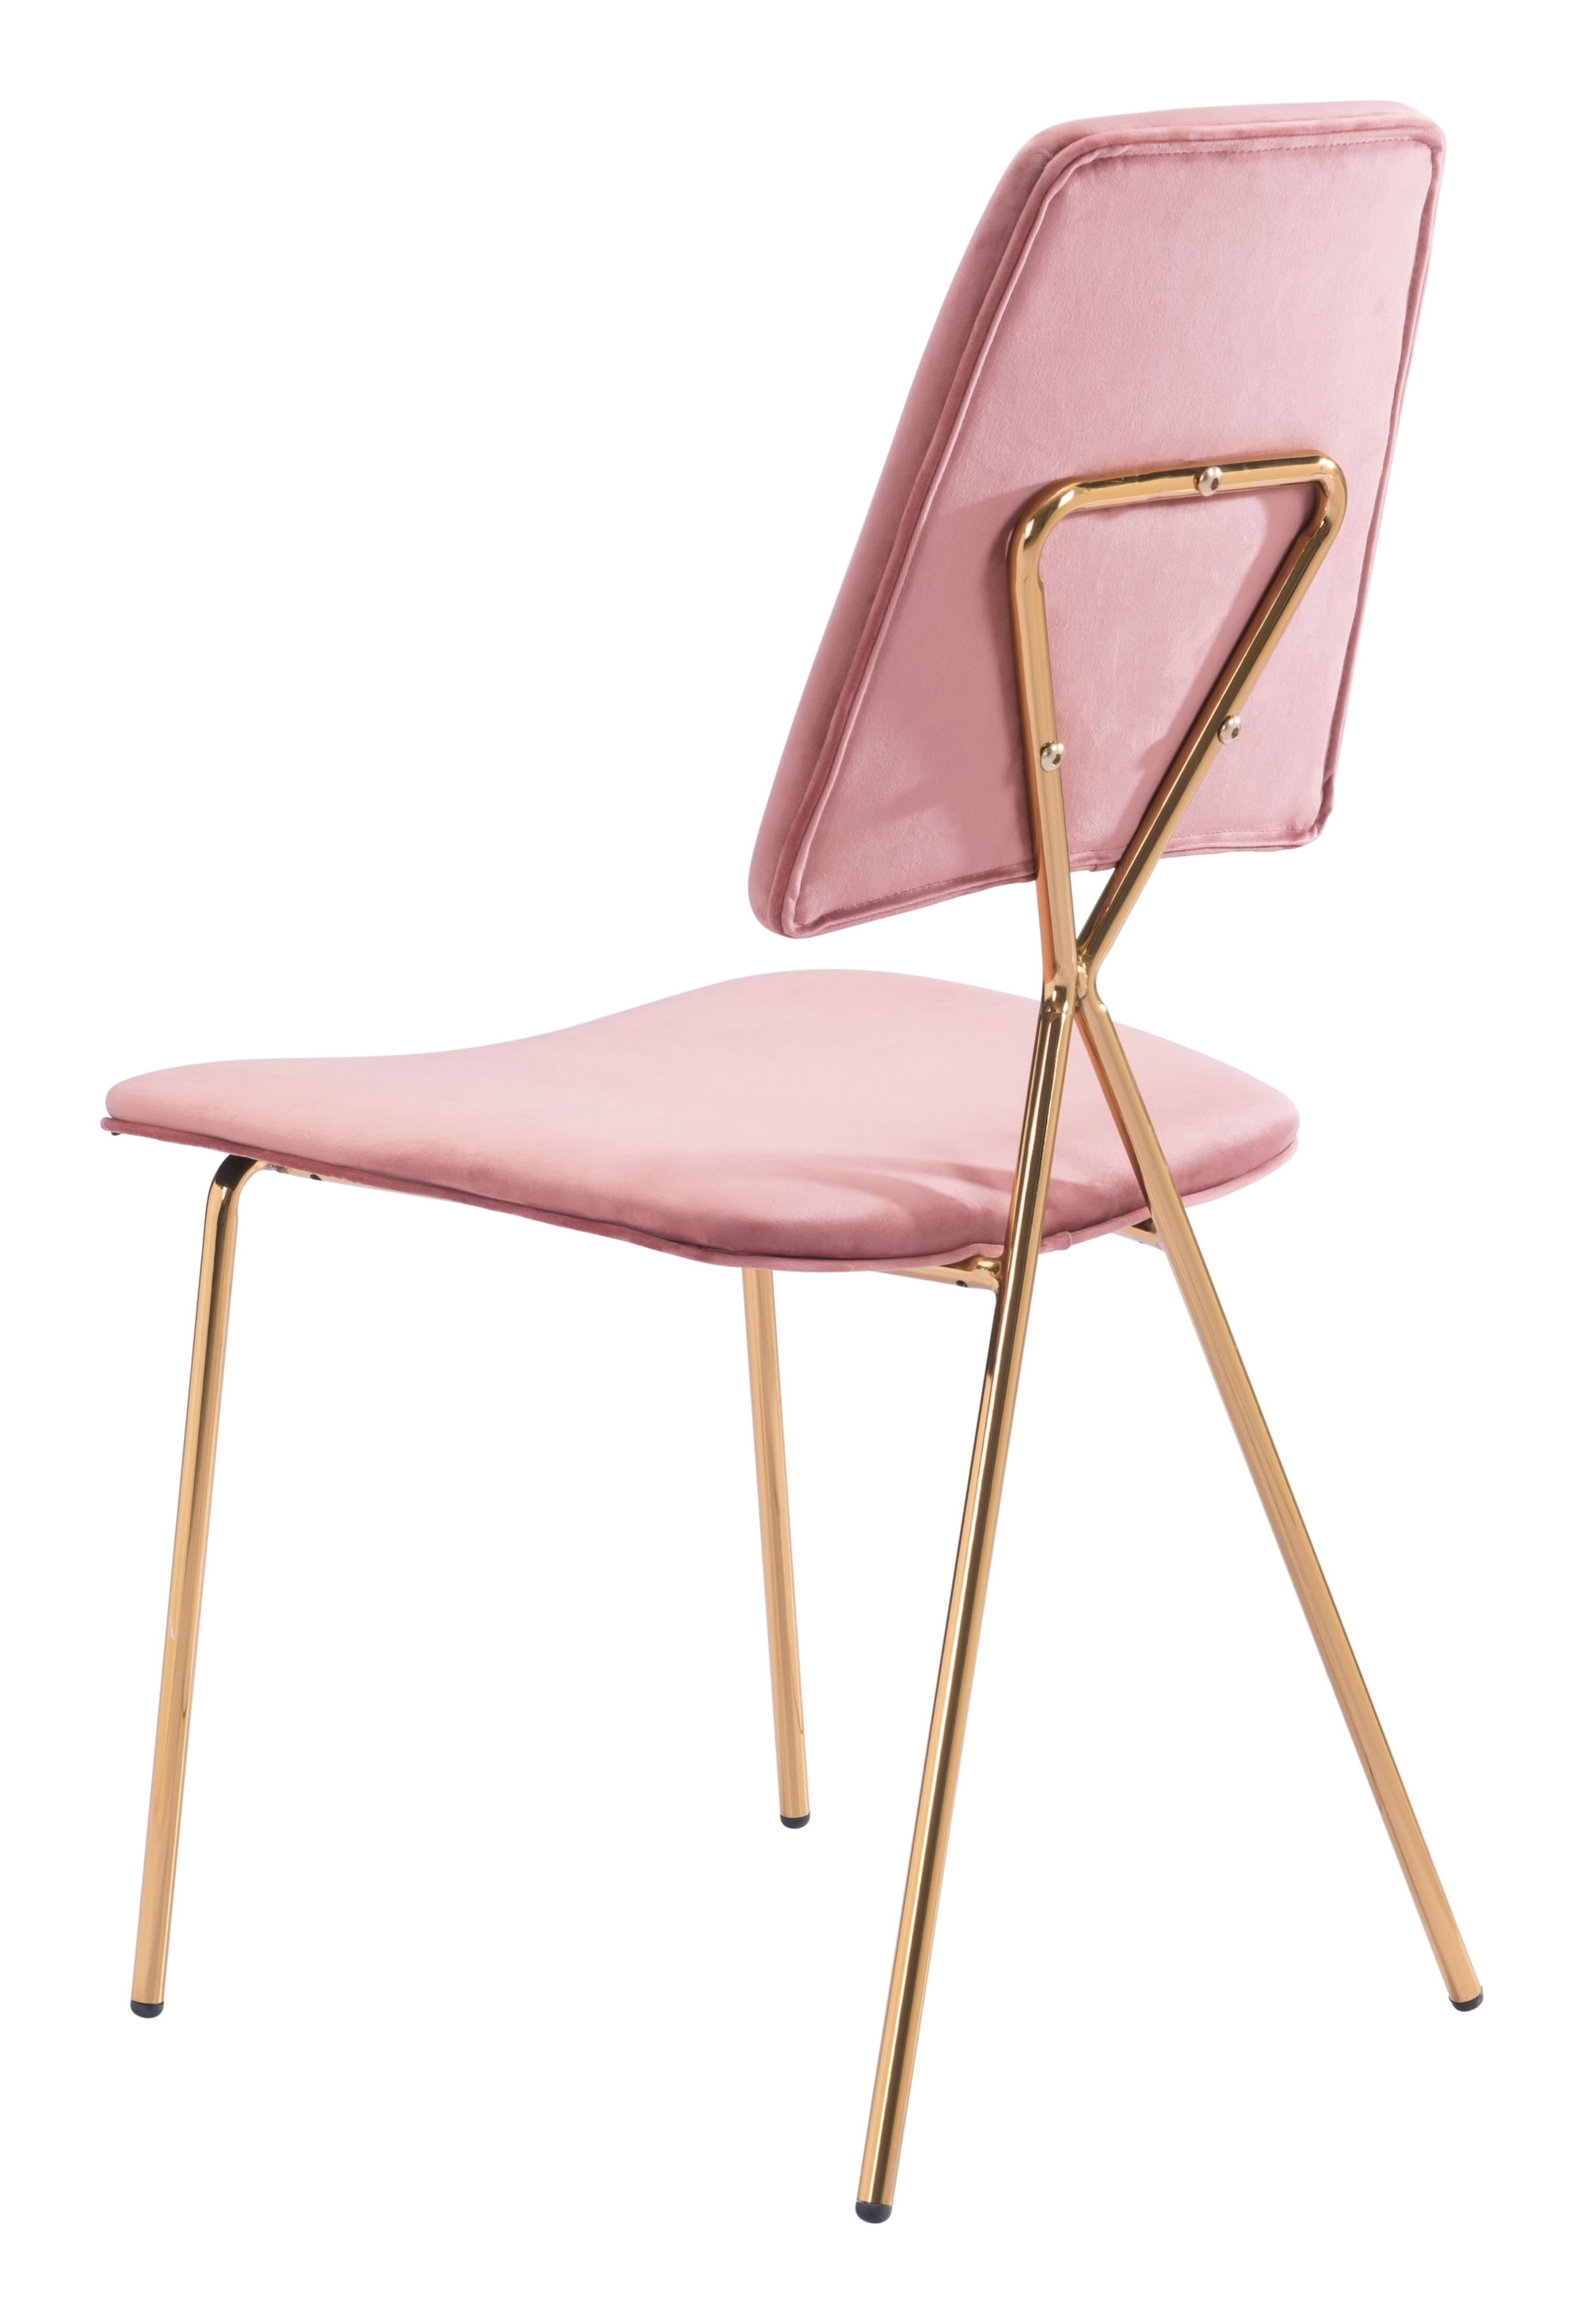 Chloe Dining Chair Pink & Gold (Set of 2) - Image 4